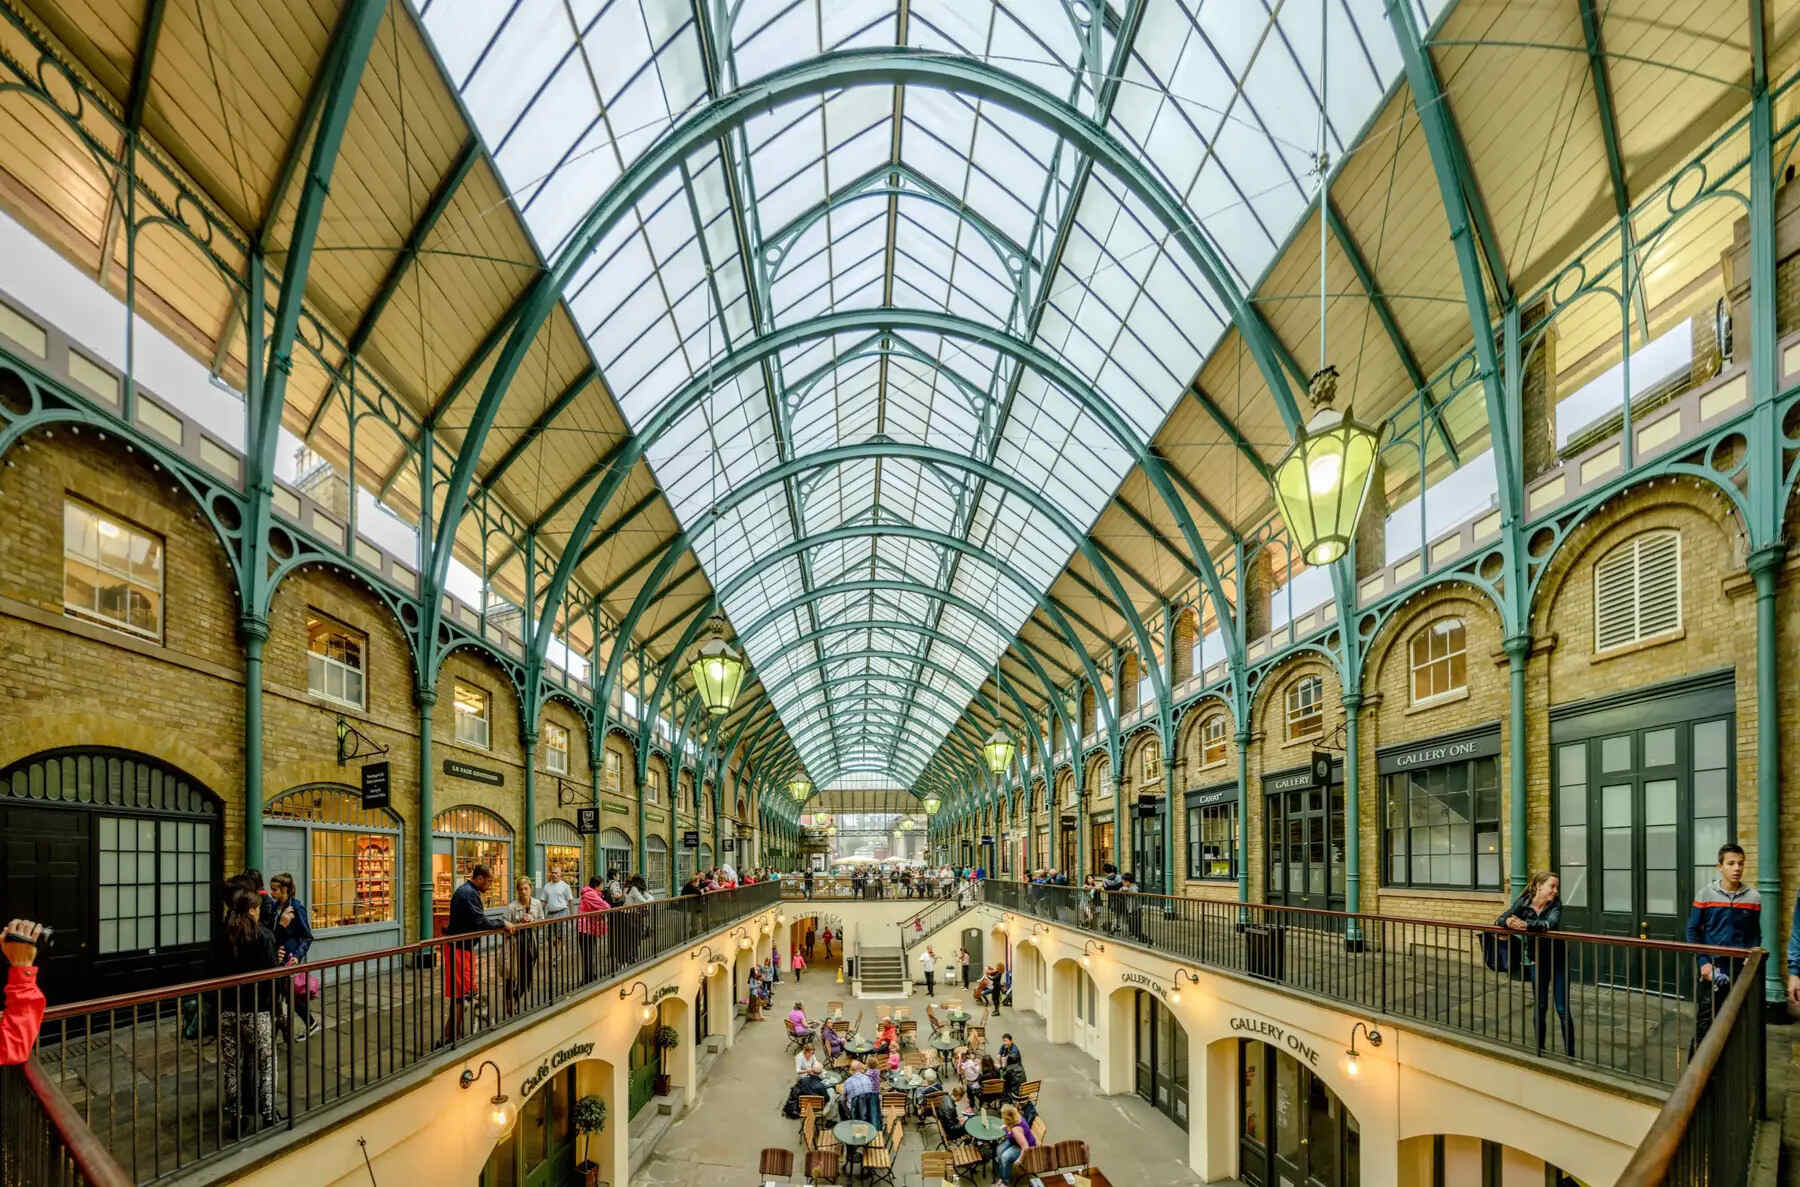 13 Fascinating Facts About Covent Garden Market (London) - Facts.net